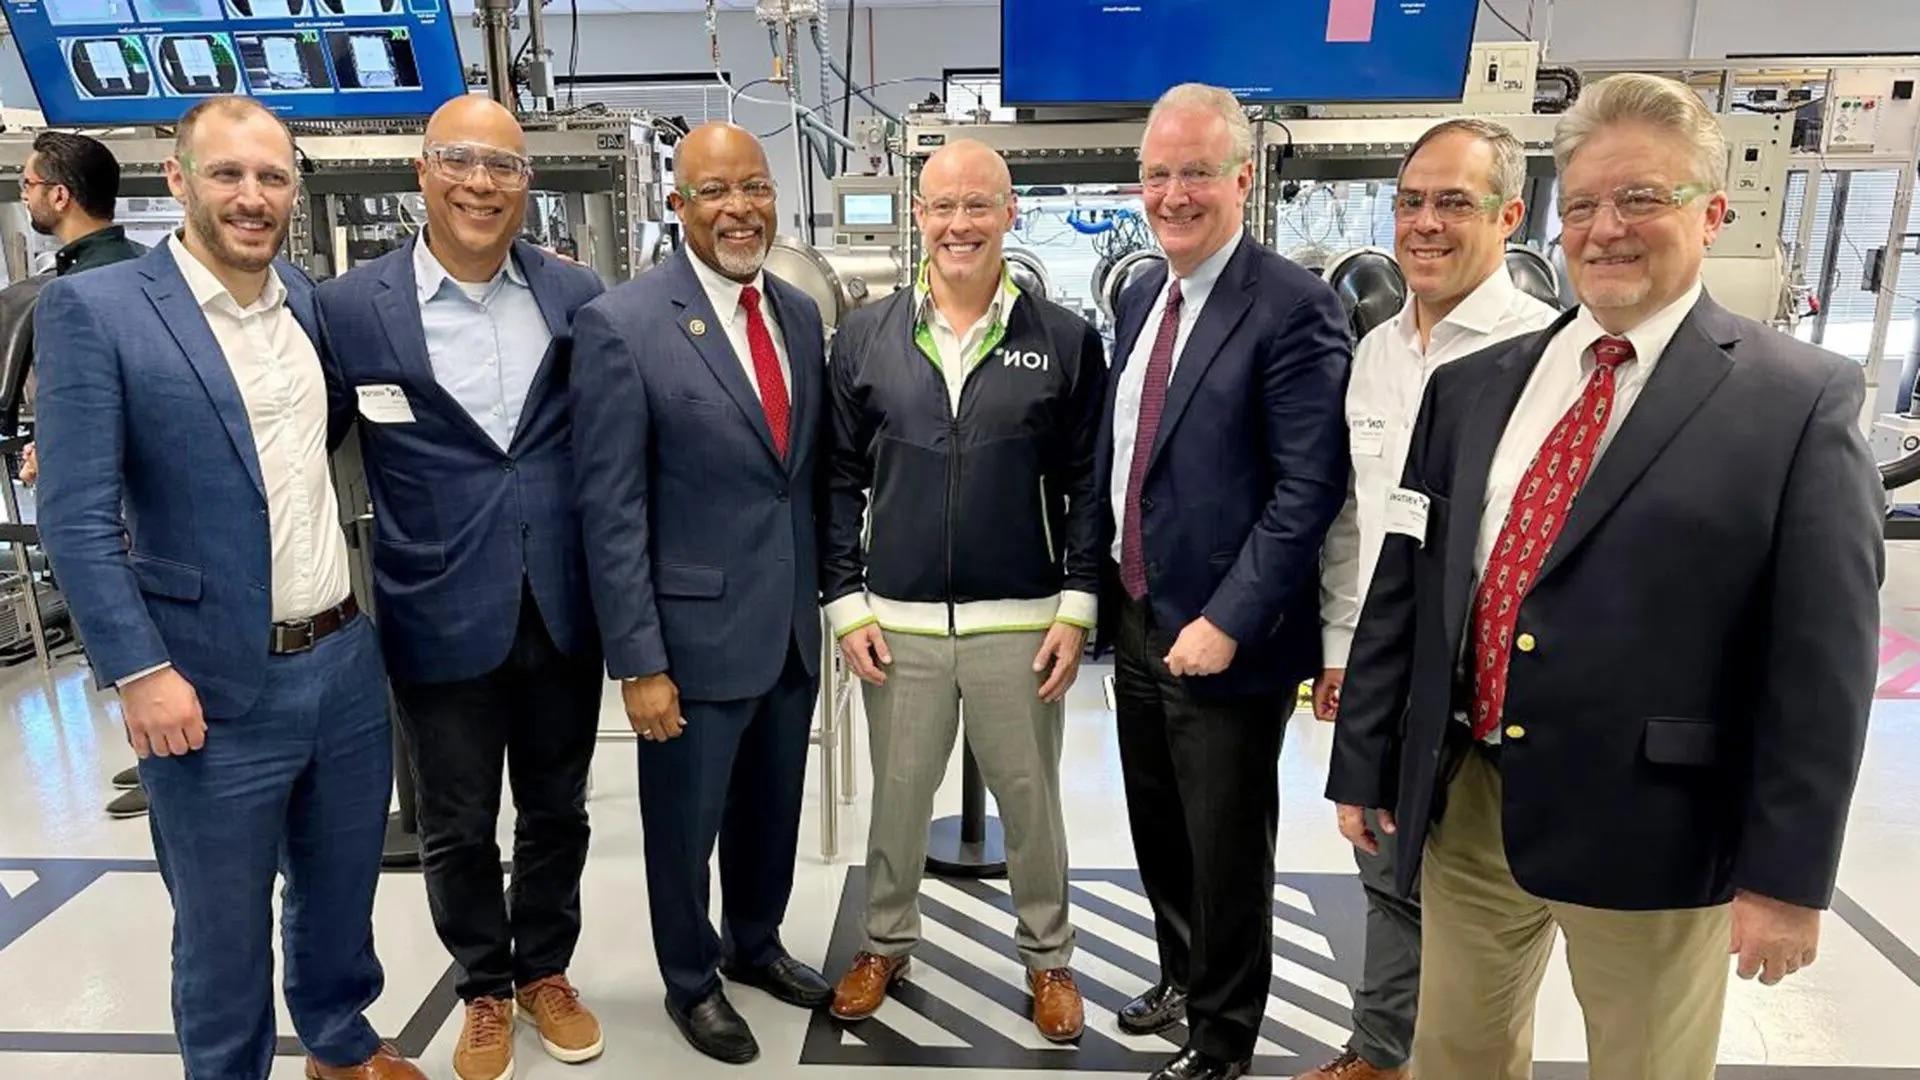 From left: Ion Storage Systems founder and Executive Chair Eric Wachsman, Todd Crescenzo of Clear Creek Investments, U.S. Sen. Chris Van Hollen, Ion Storage Systems CEO Ricky Hanna, U.S. Rep. Glenn Ivey, Mark Fields of Alsop Louie, Ion Storage Systems founder and Chief Technology Officer Greg Hitz